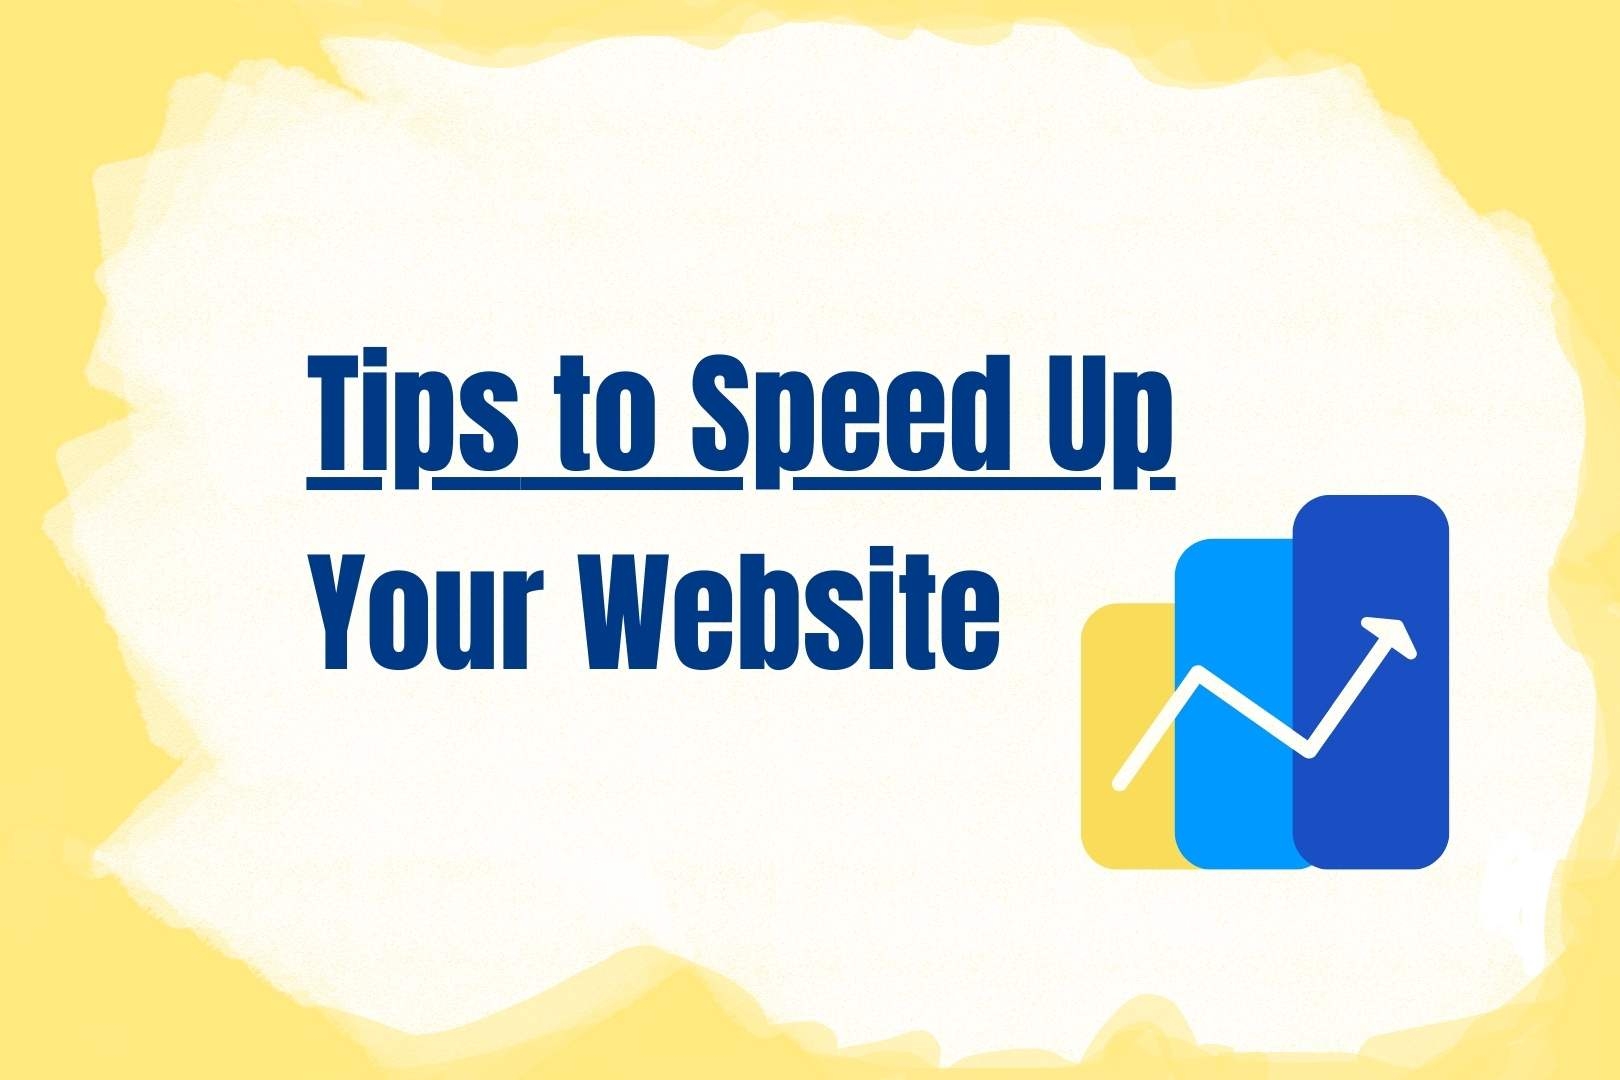 Tips to Speed Up Your Website